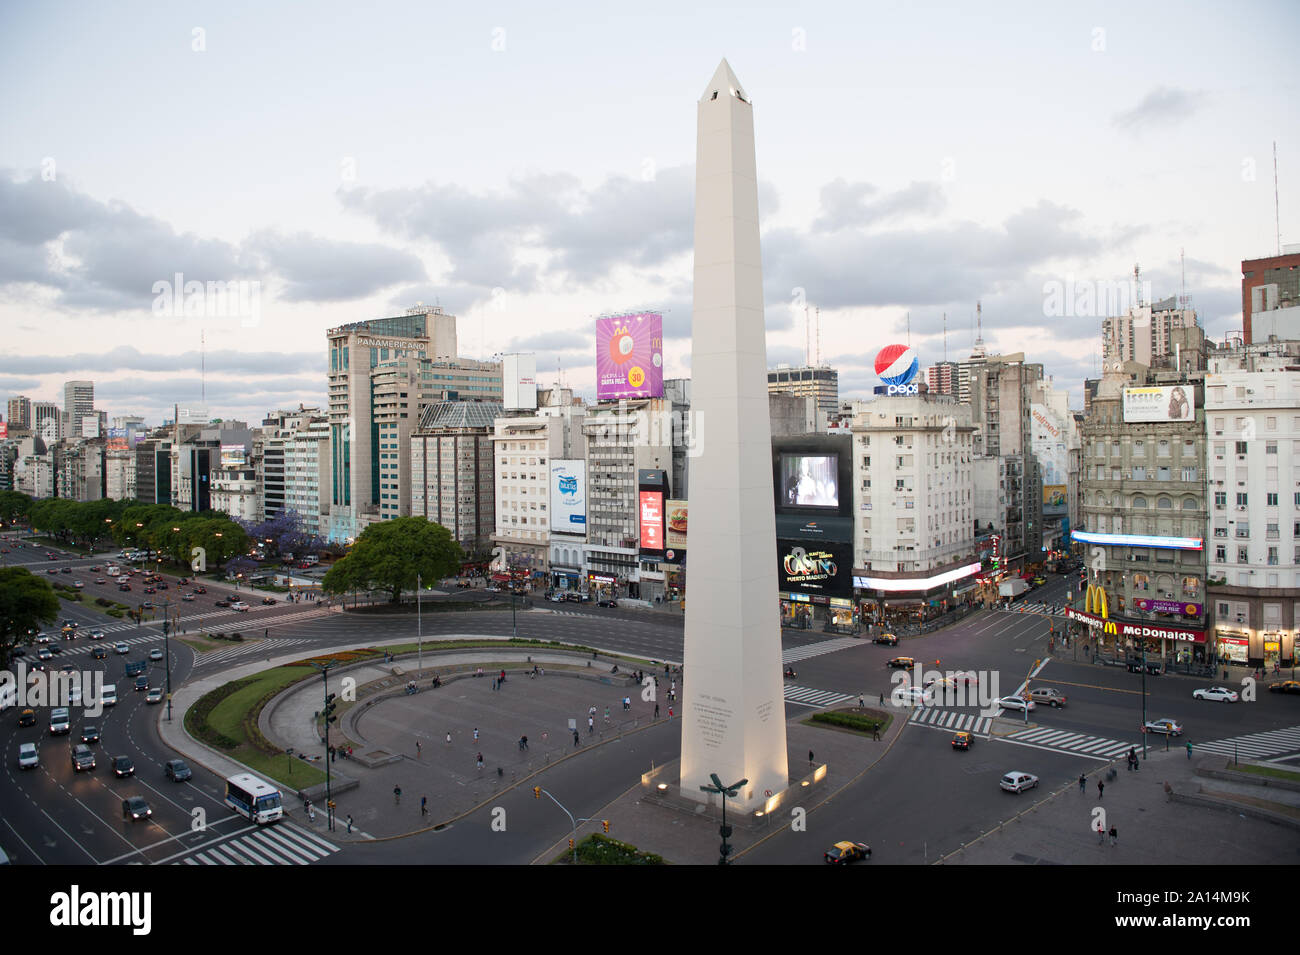 Buenos Aires, Argentina - November 12 2012: Pedestrian and traffic on the sreets of Buenos Aires city. This photo shows the downtown and de 9 de Julio Stock Photo